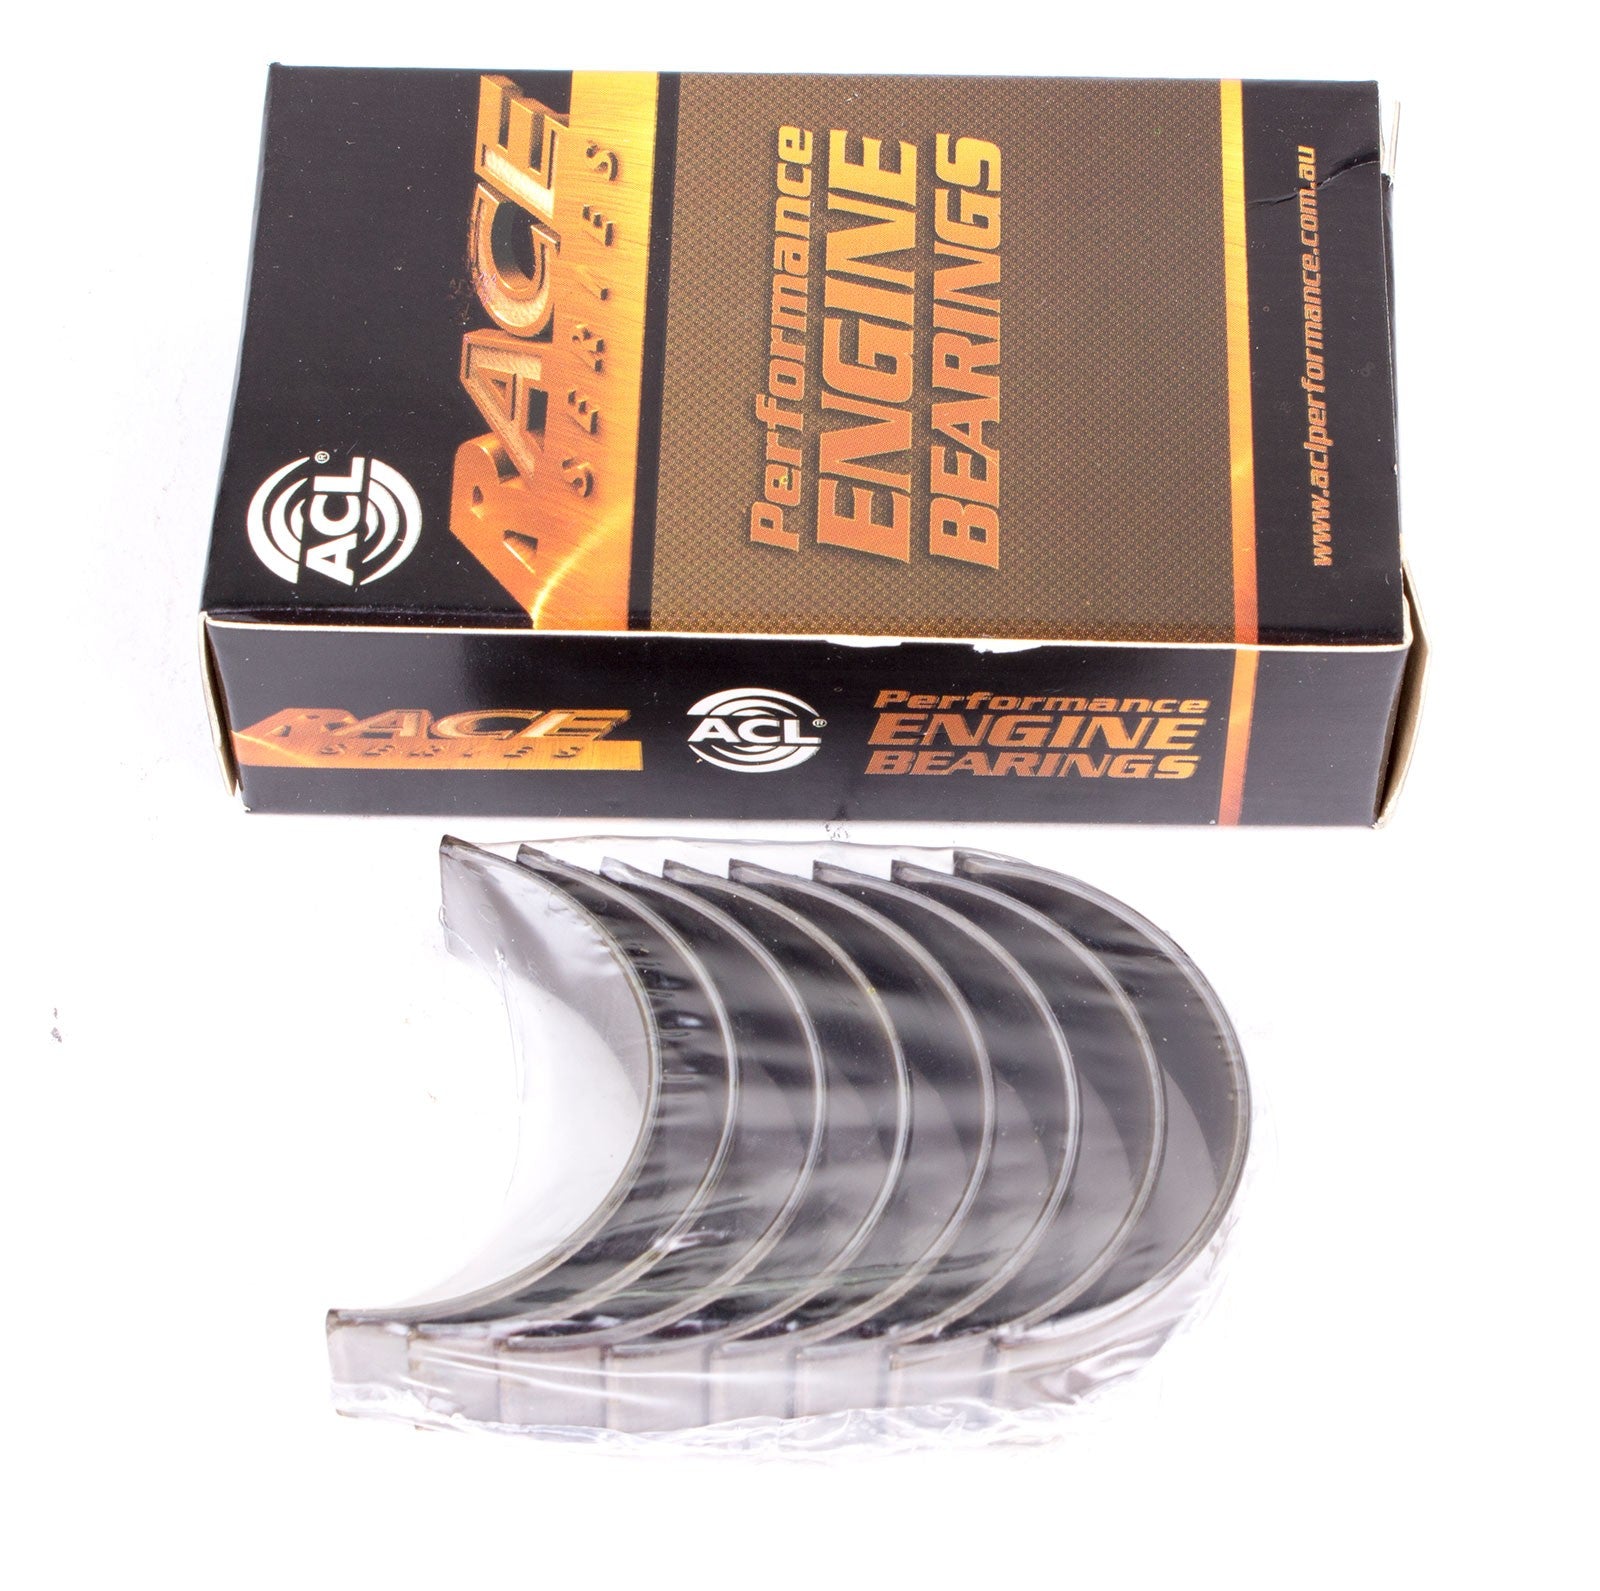 ACL 6B2270H-.25 Con rod bearing set (ACL Race Series) Photo-0 